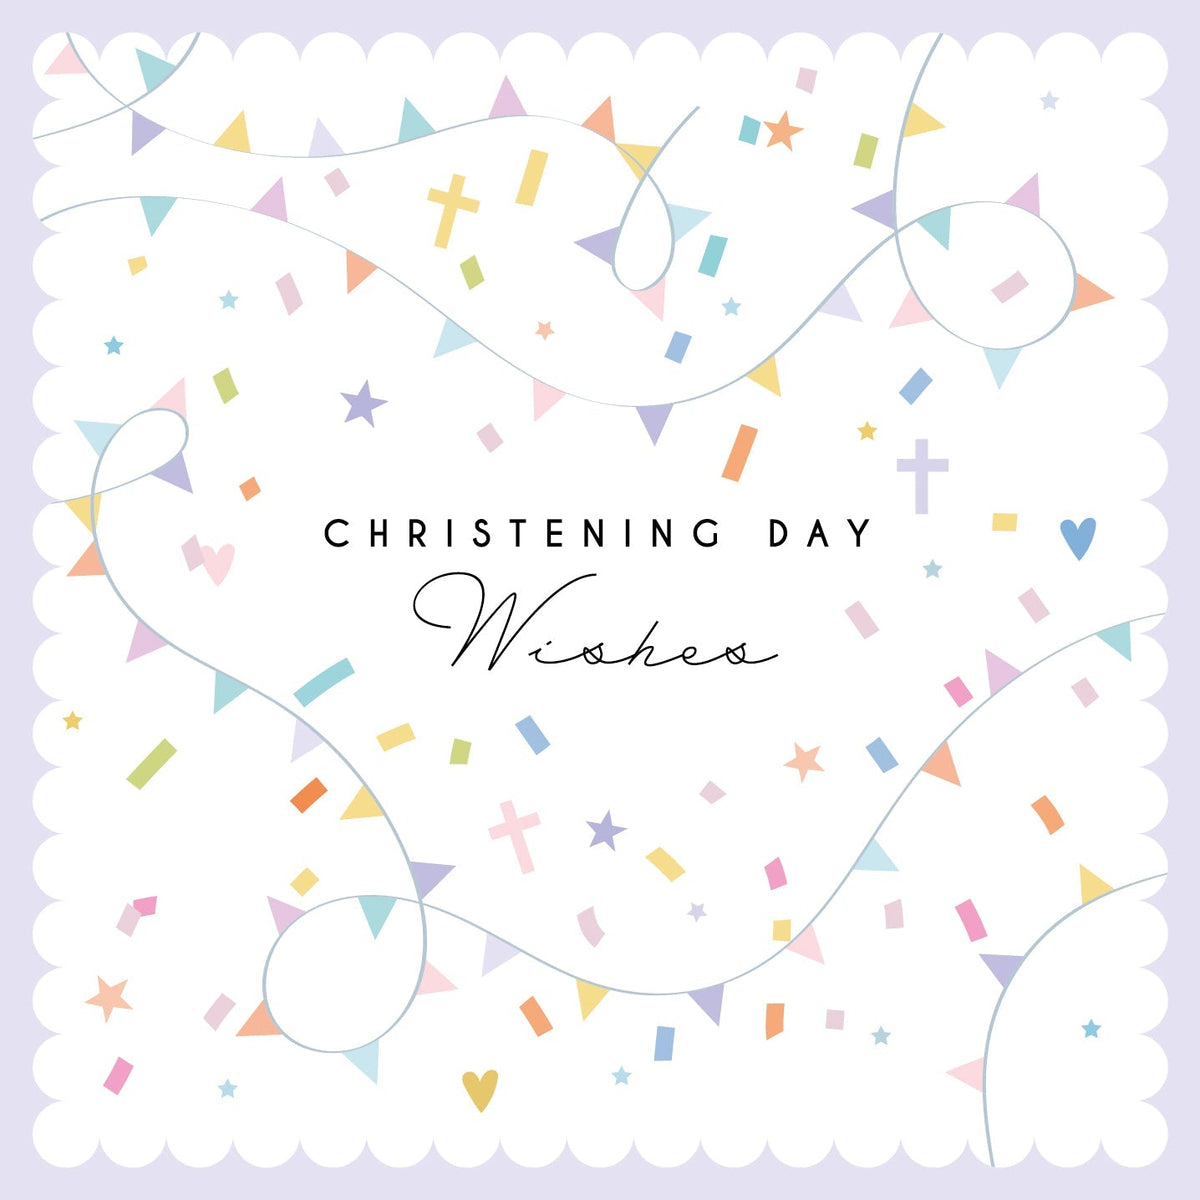 Christening Day Wishes Card